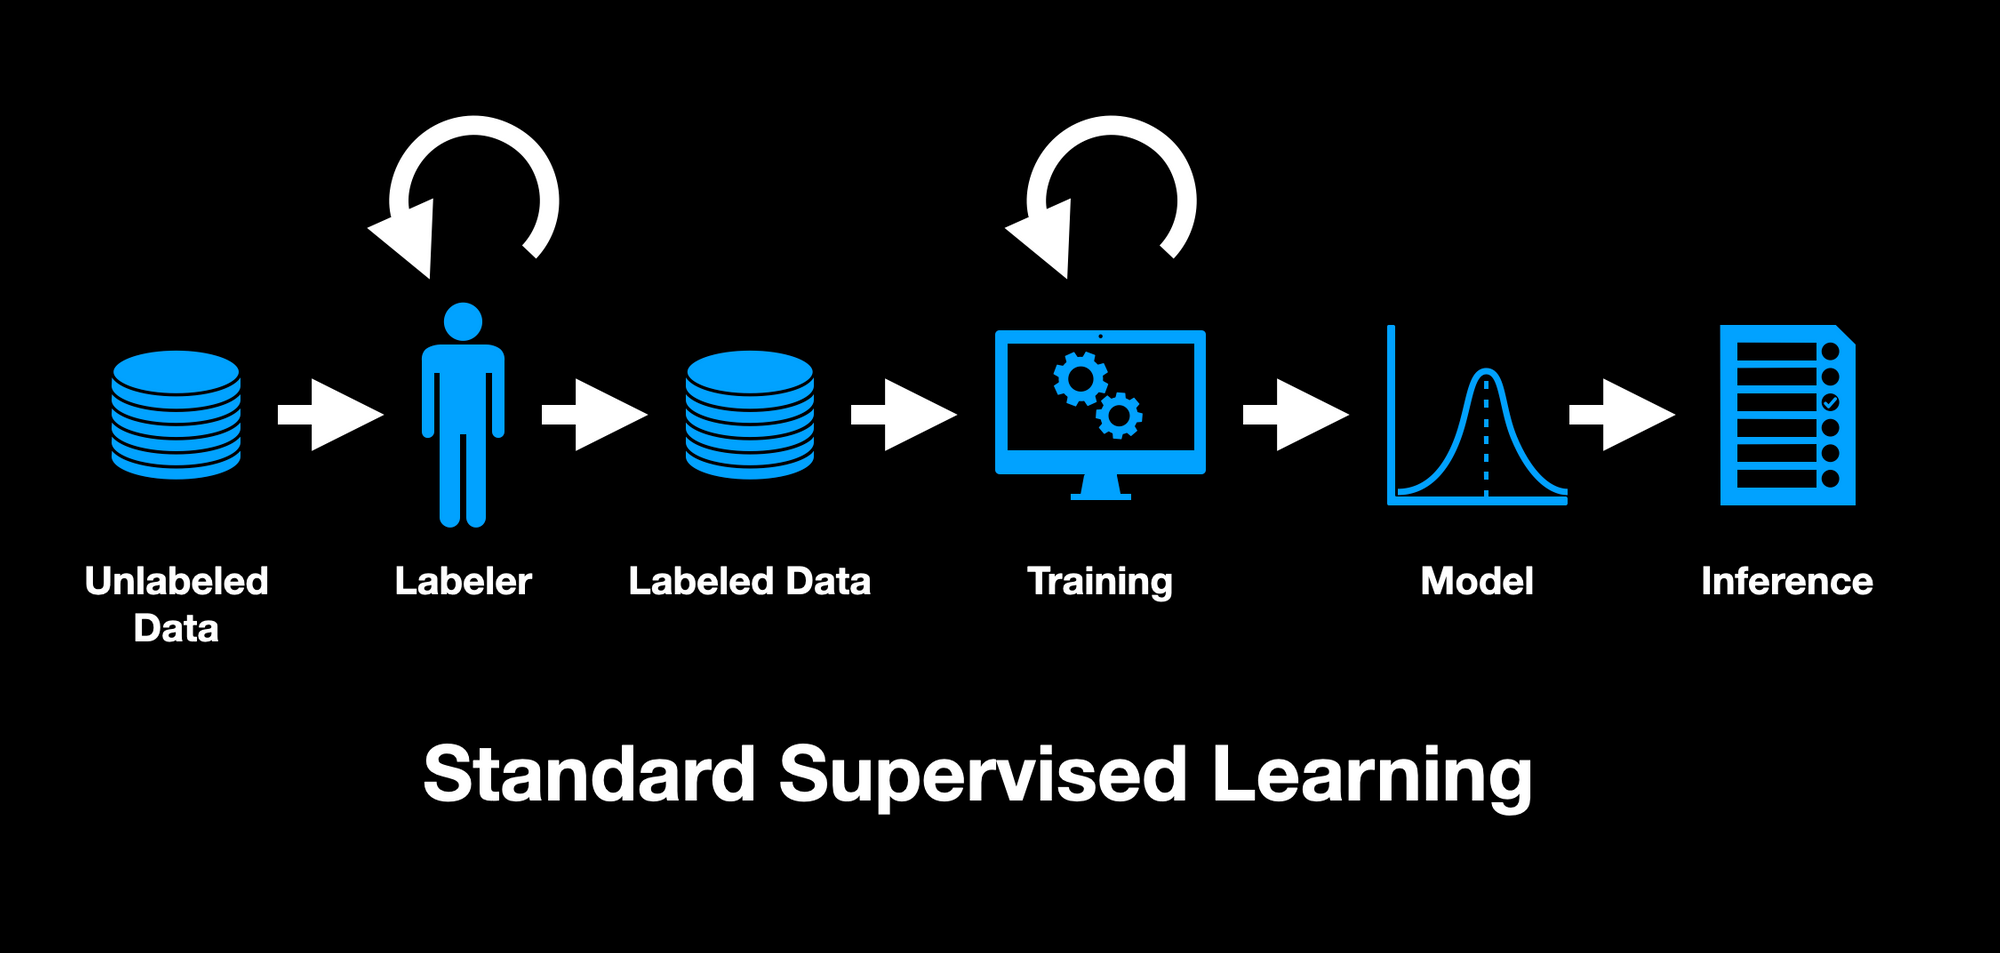 A flow diagram showing the steps of standard supervised learning from unlabeled data to labeler to labeled data to training to model to inference. There are loop back arrows over the labeler and training steps.